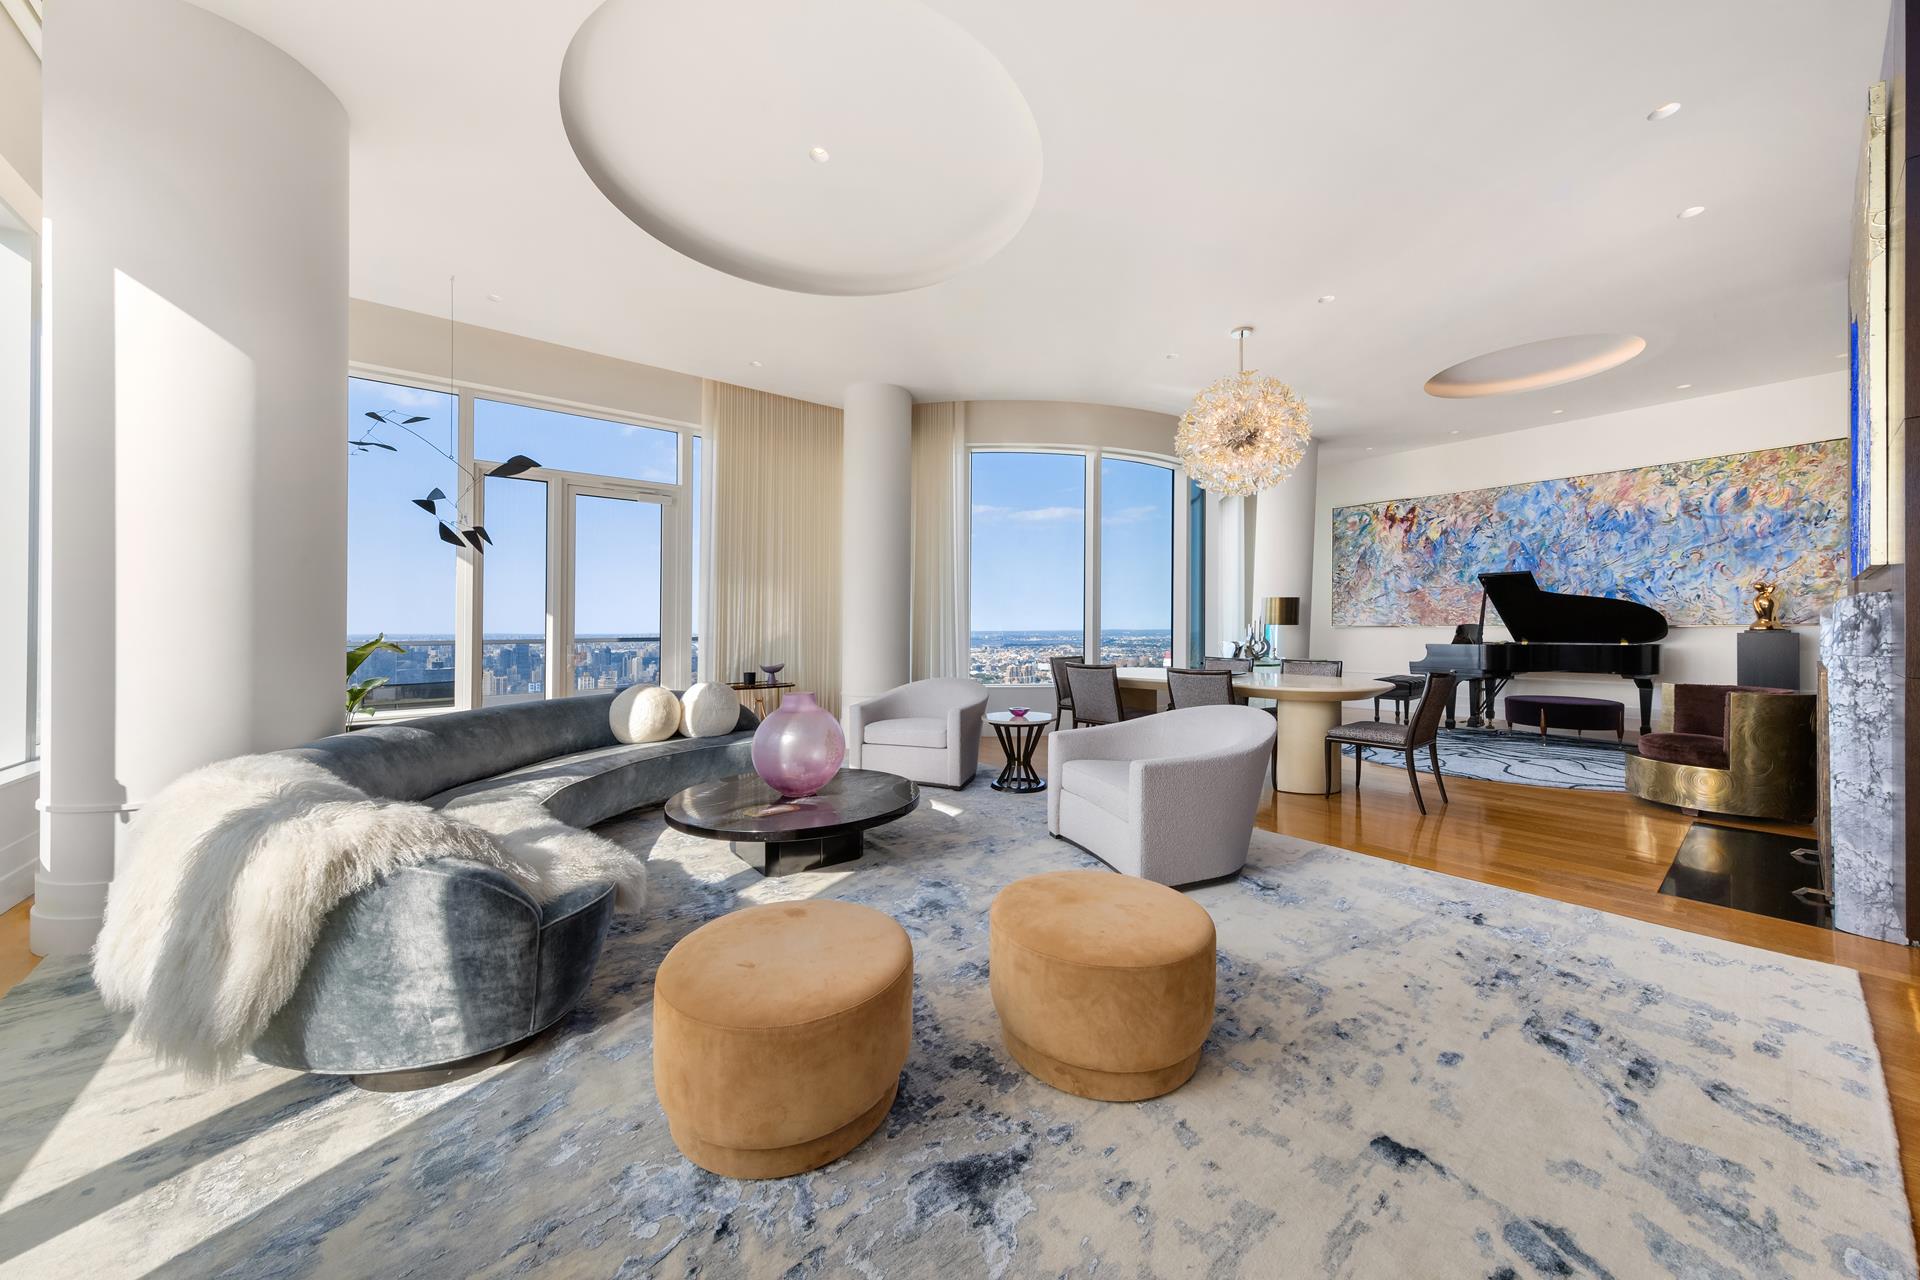 252 East 57th Street 60A, Sutton, Midtown East, NYC - 4 Bedrooms  
4.5 Bathrooms  
9 Rooms - 